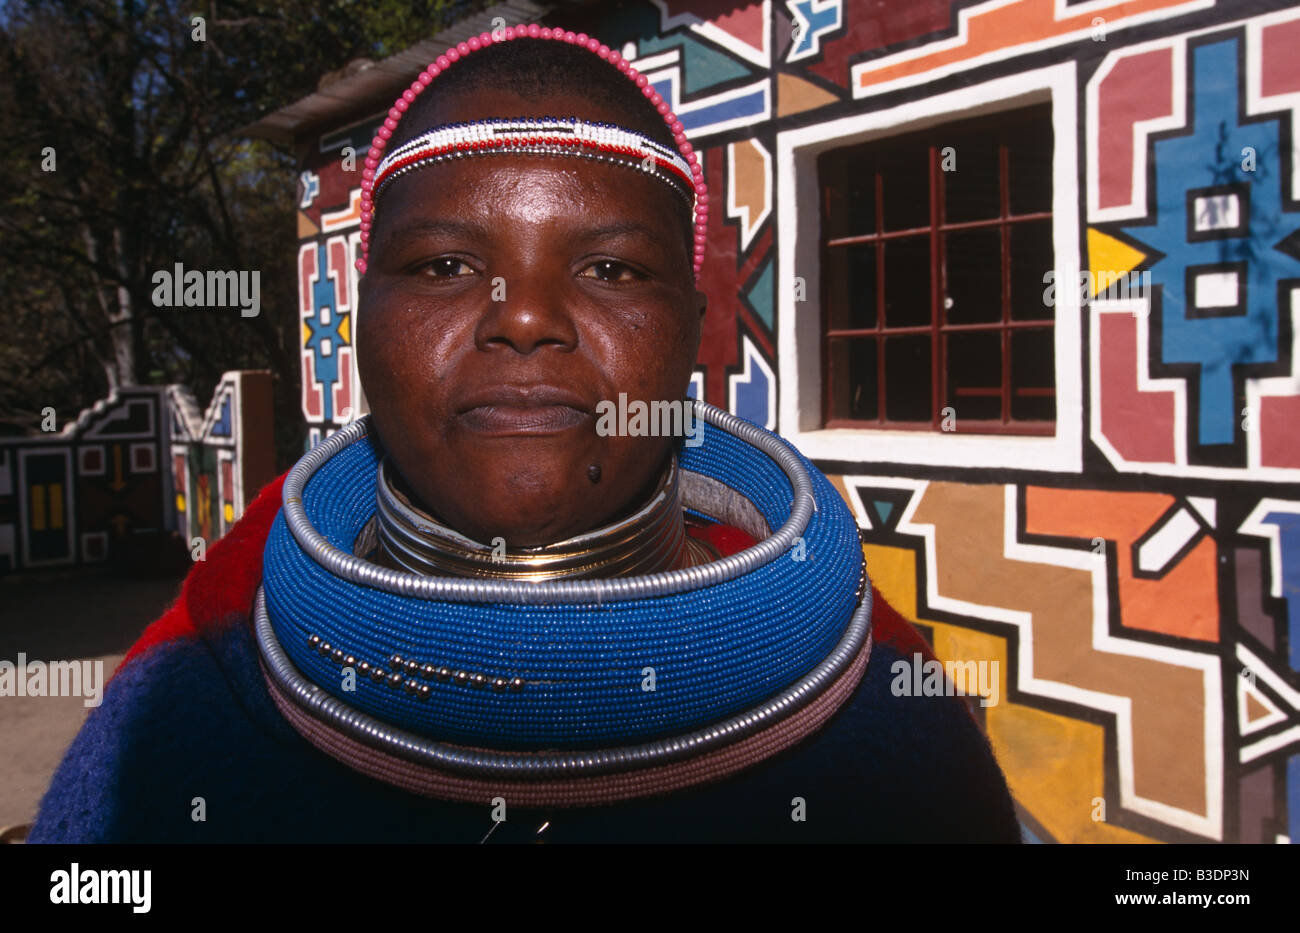 Ndebele woman in South Africa. Stock Photo